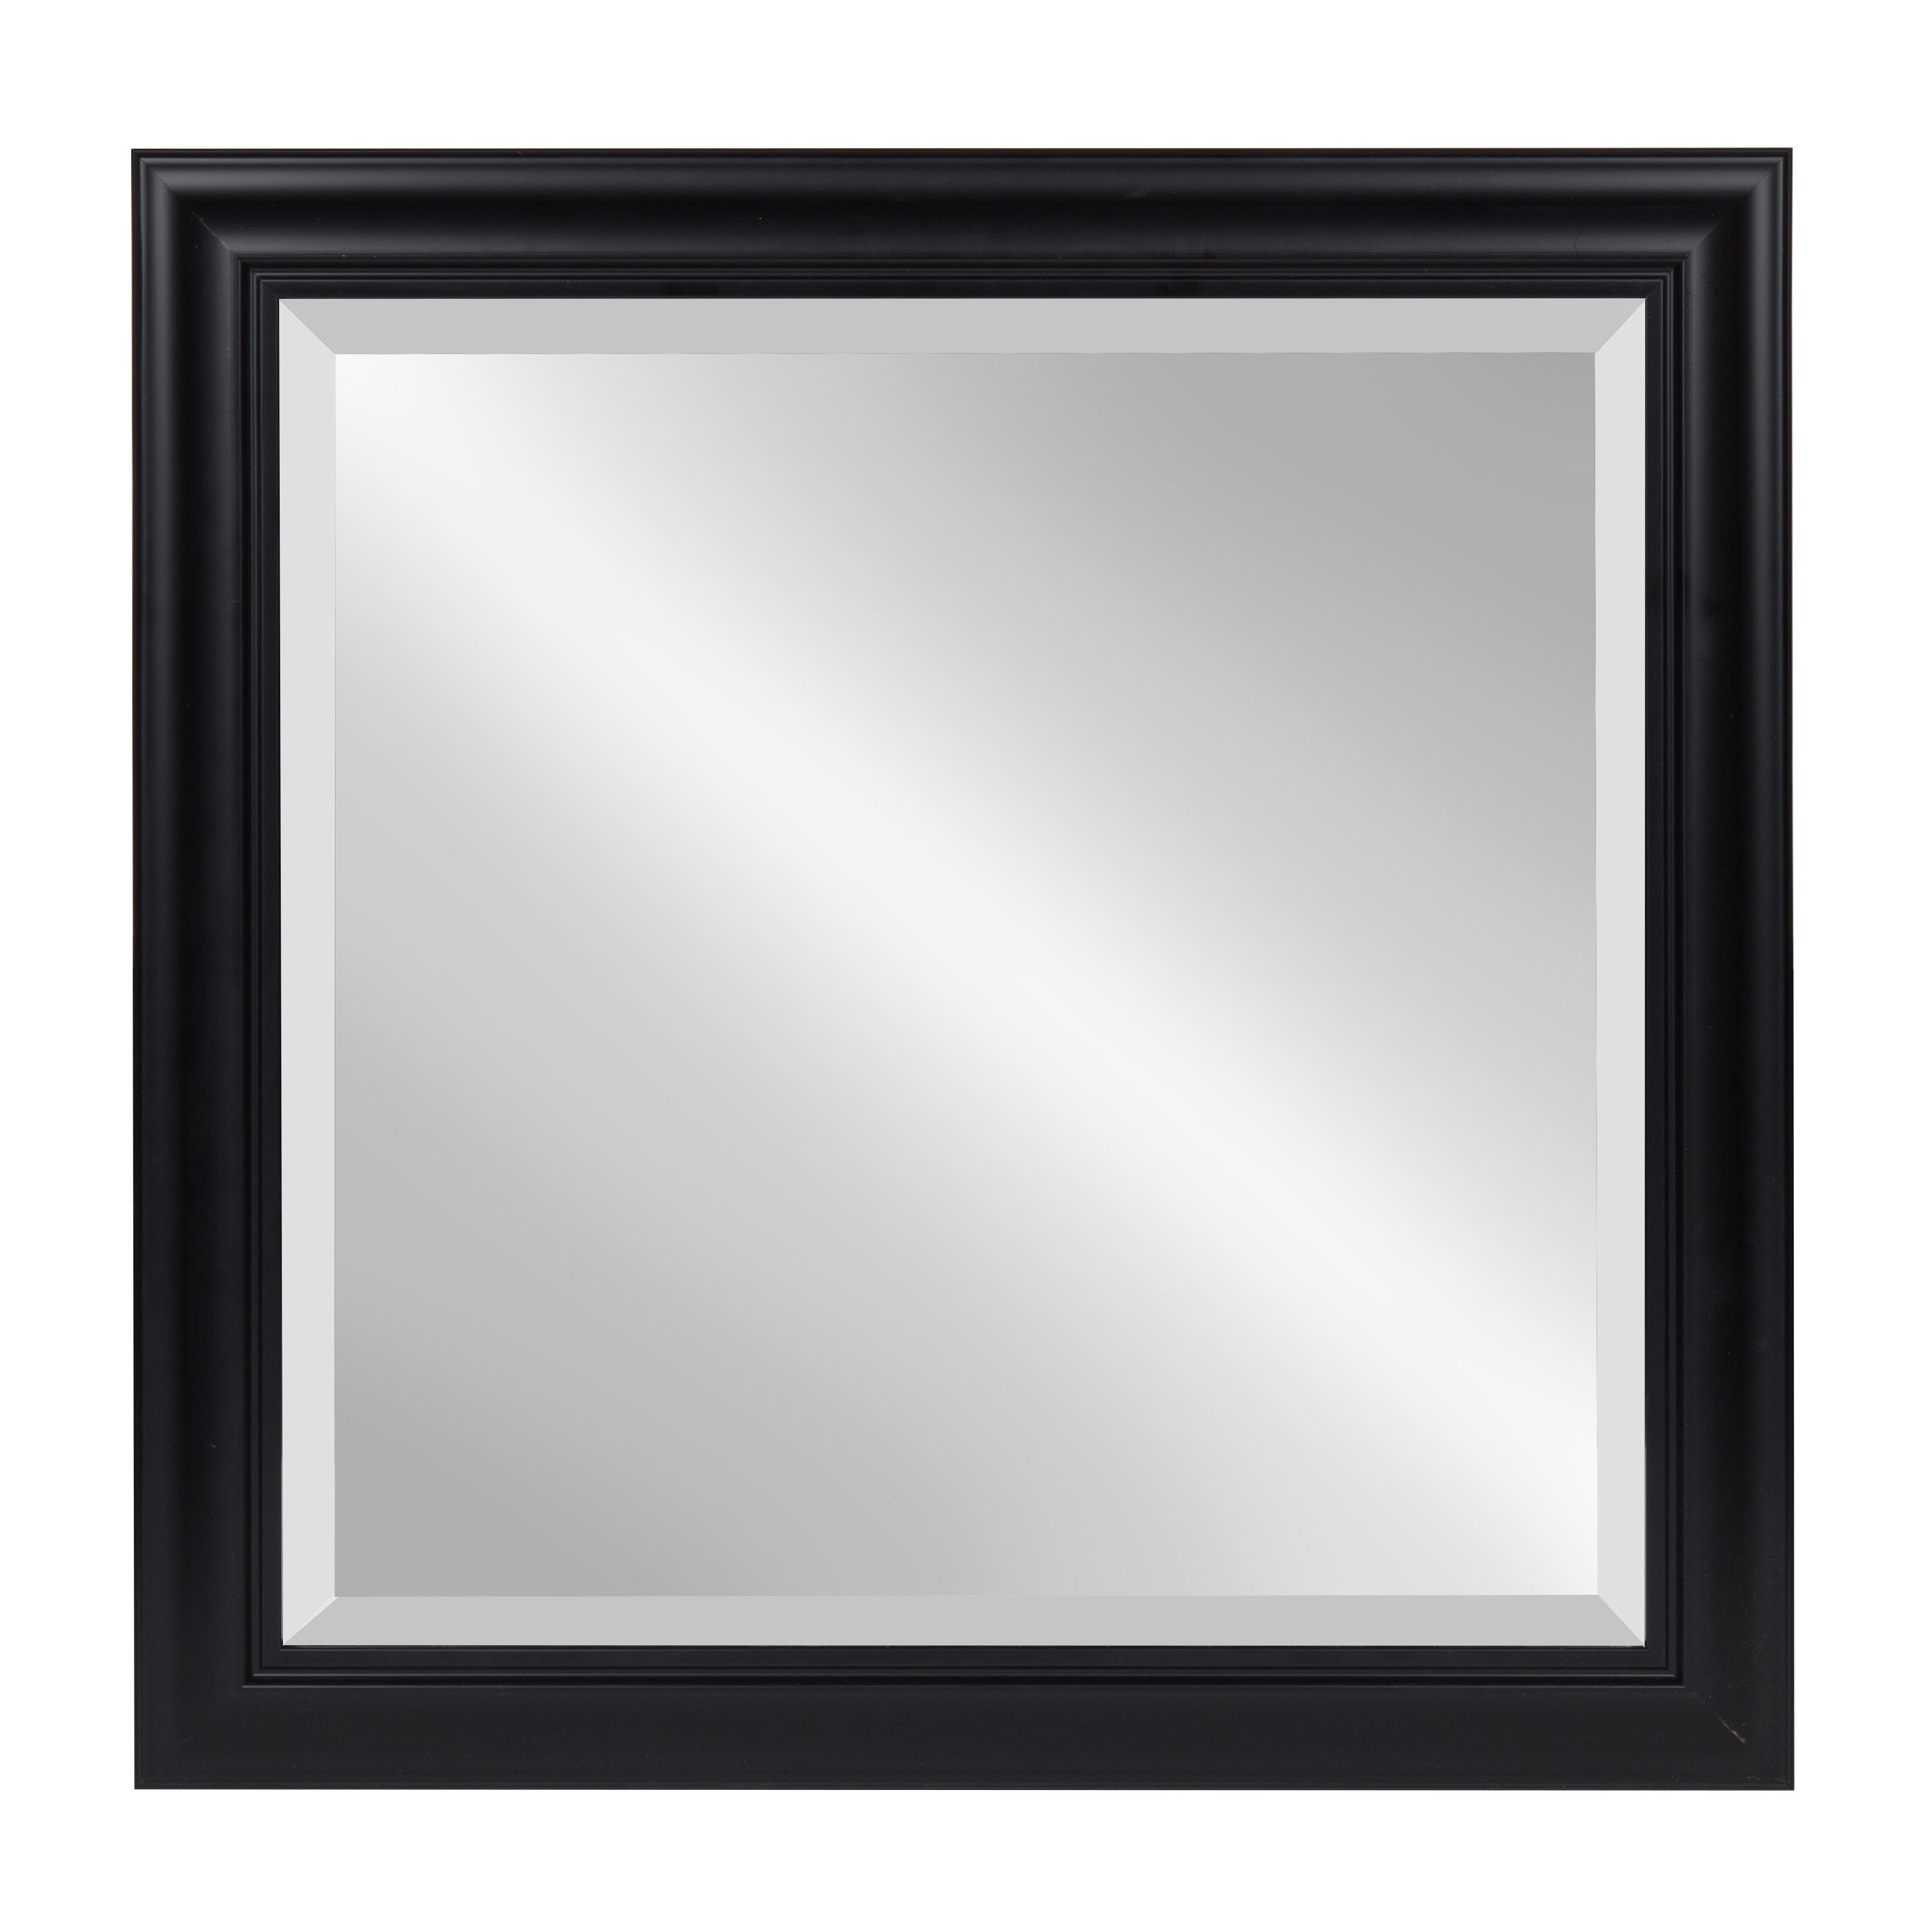 Famous Dedrick Decorative Framed Modern And Contemporary Wall Mirrors Within Hegarty Square Framed Accent Mirror (View 7 of 20)